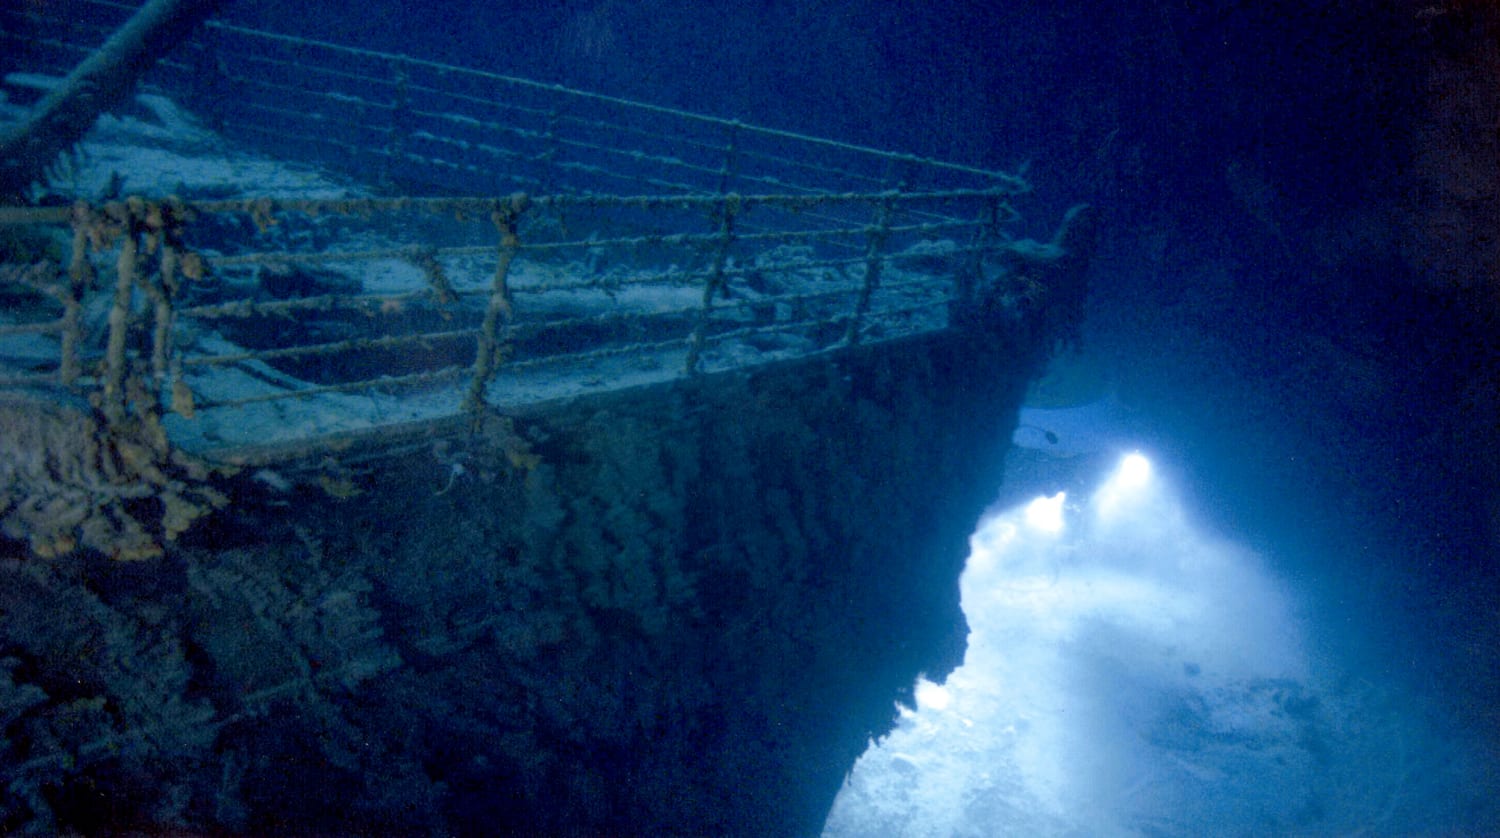 real pictures of the sunken titanic